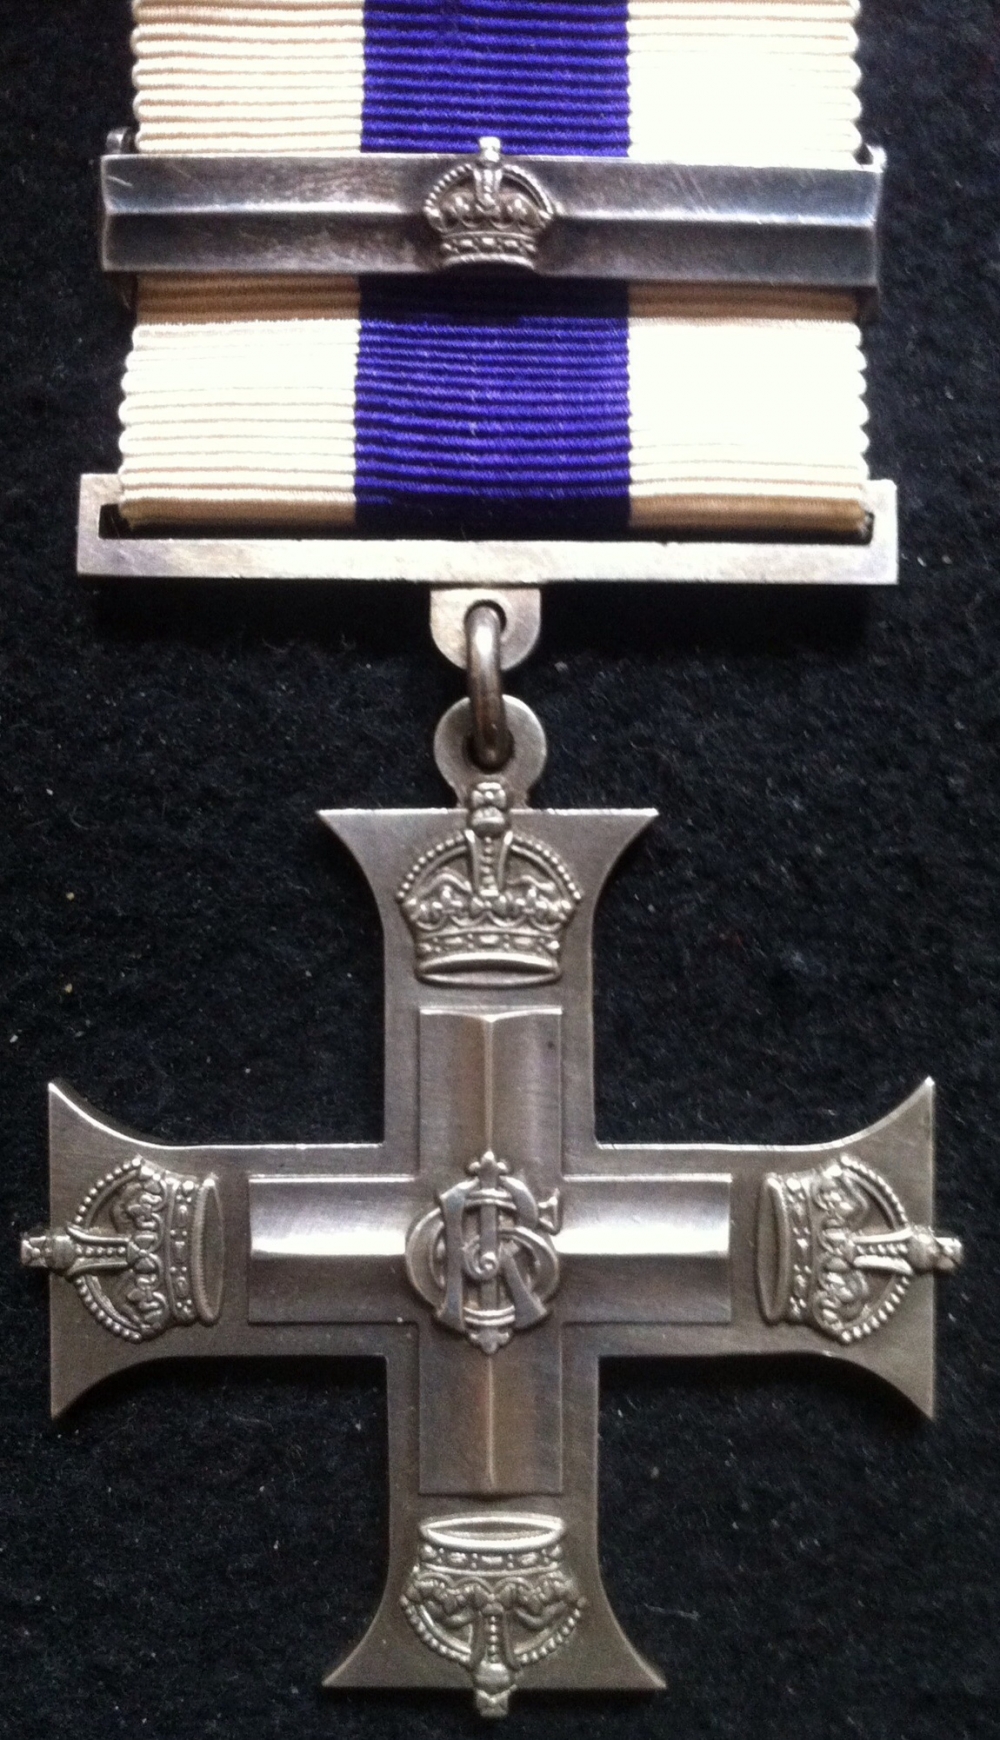 Example of a Military Cross & Bar (where the decoration has been awarded a second time).